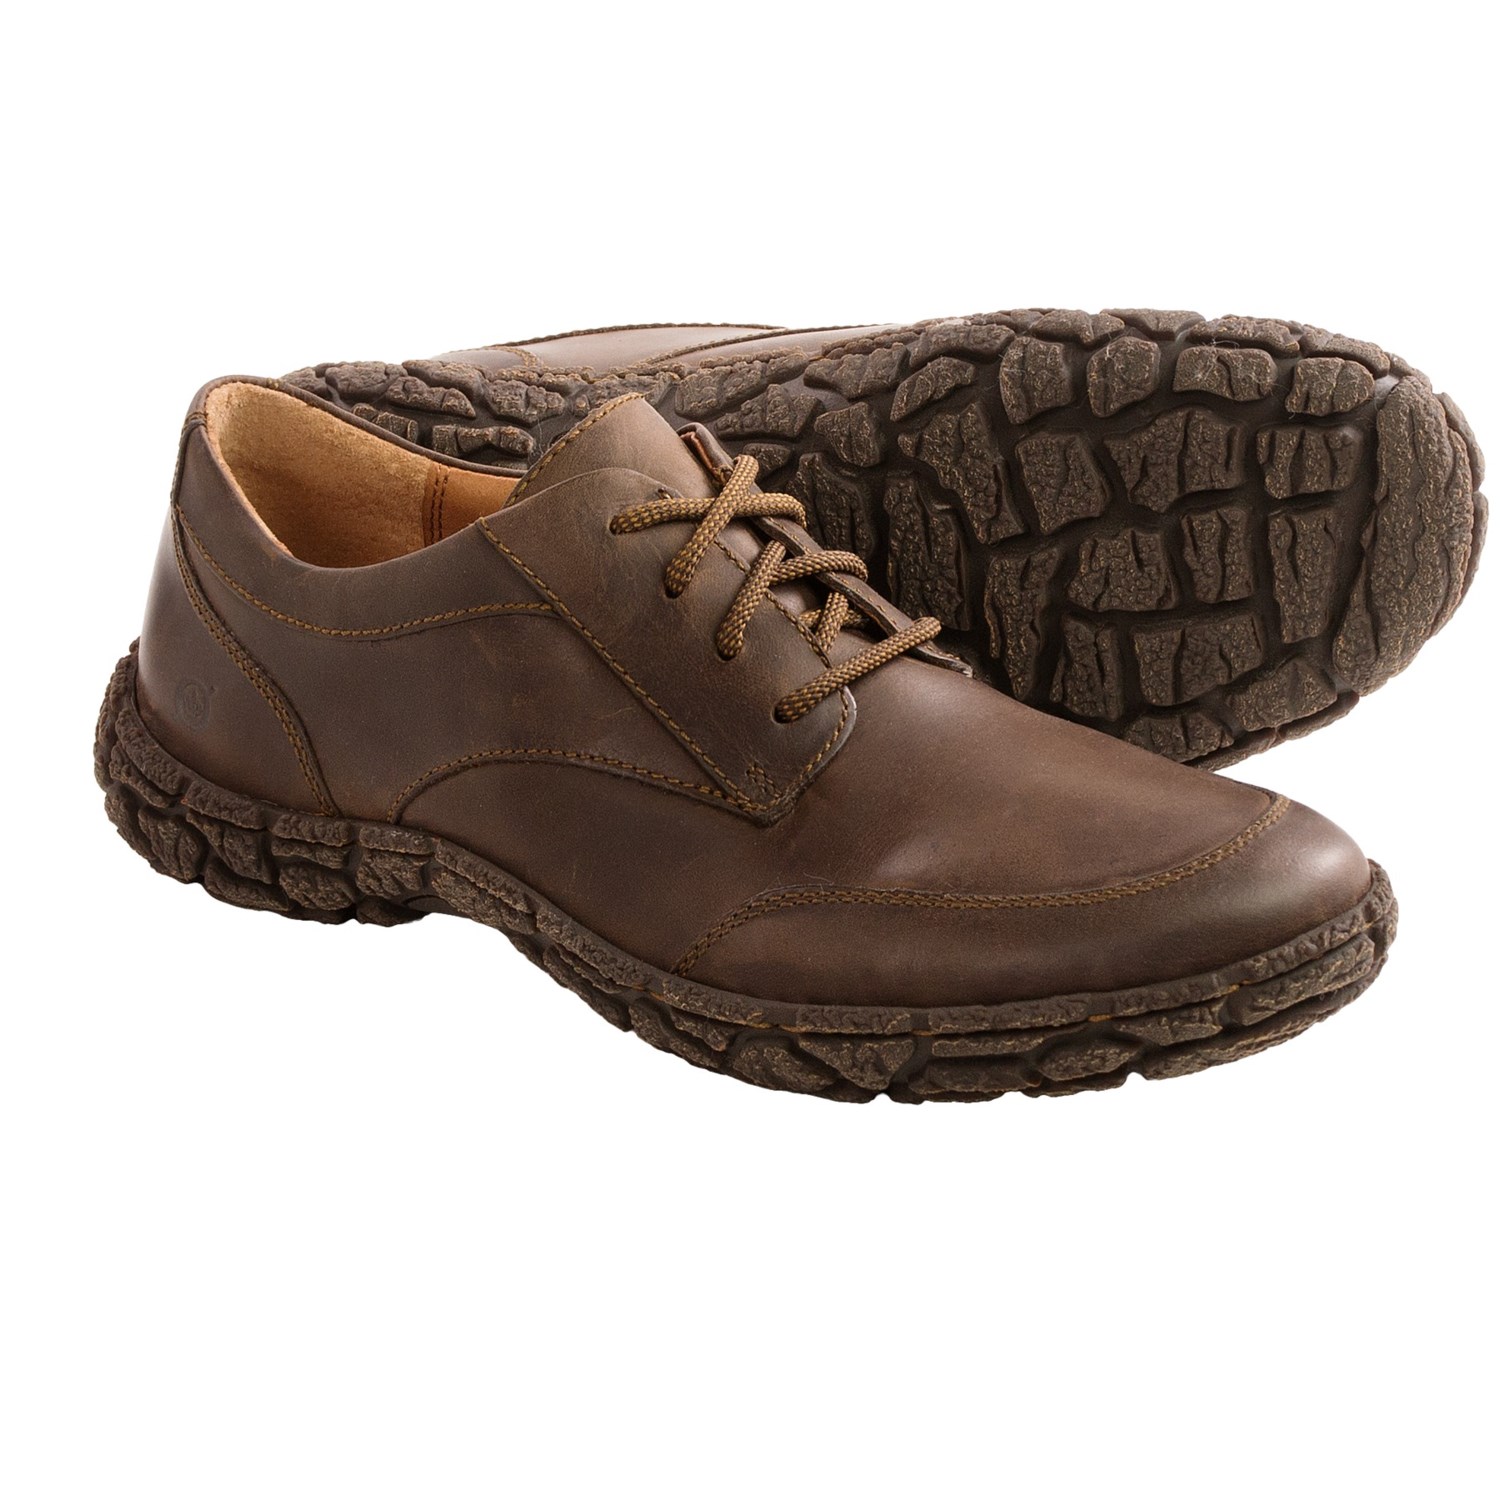 Born Hobart Leather Oxford Shoes (For Men) in Ironstone Full Grain